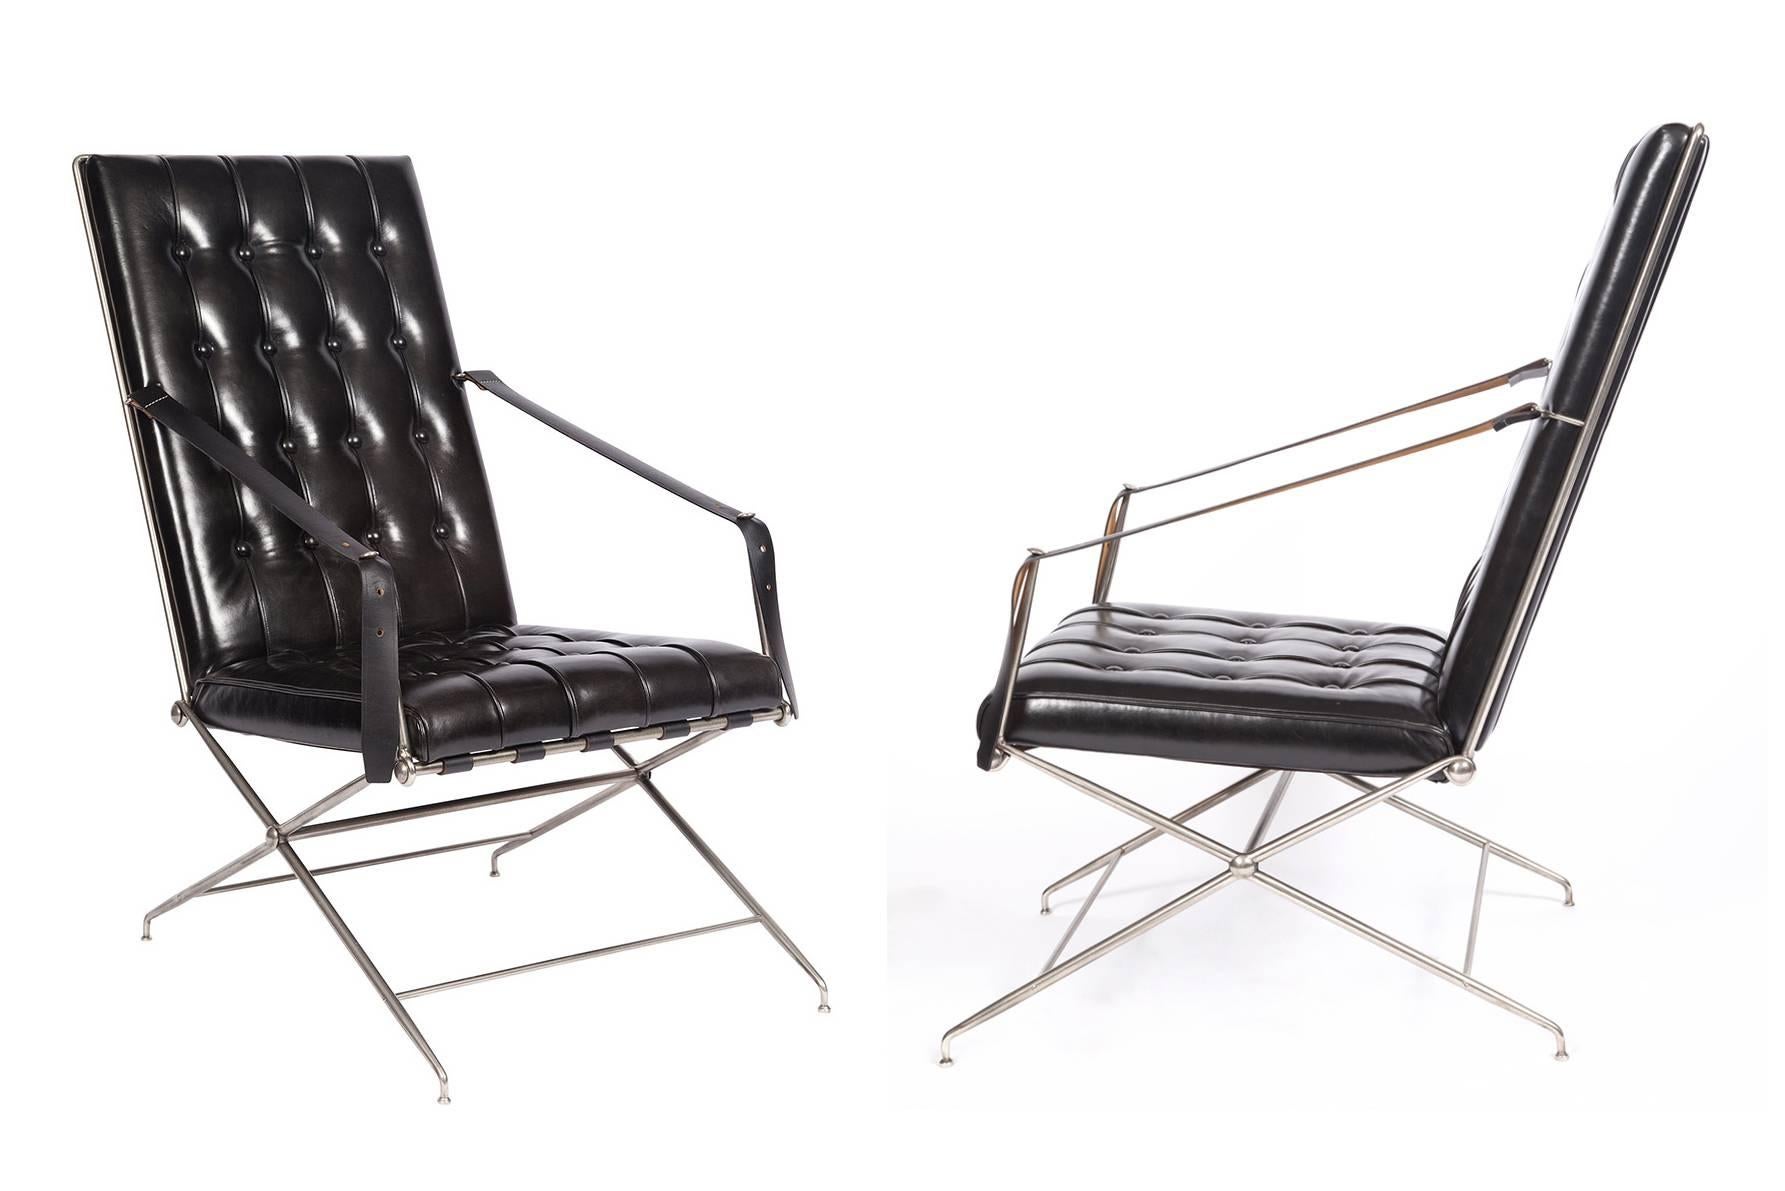 Designed by John Vesey, the pair of Napoleonic campaign adjustable chairs are of the model in his repertoire that rarely surfaced on the vintage market, circa 1958, these chairs were constructed with a frame of matte chromed steel that appears very